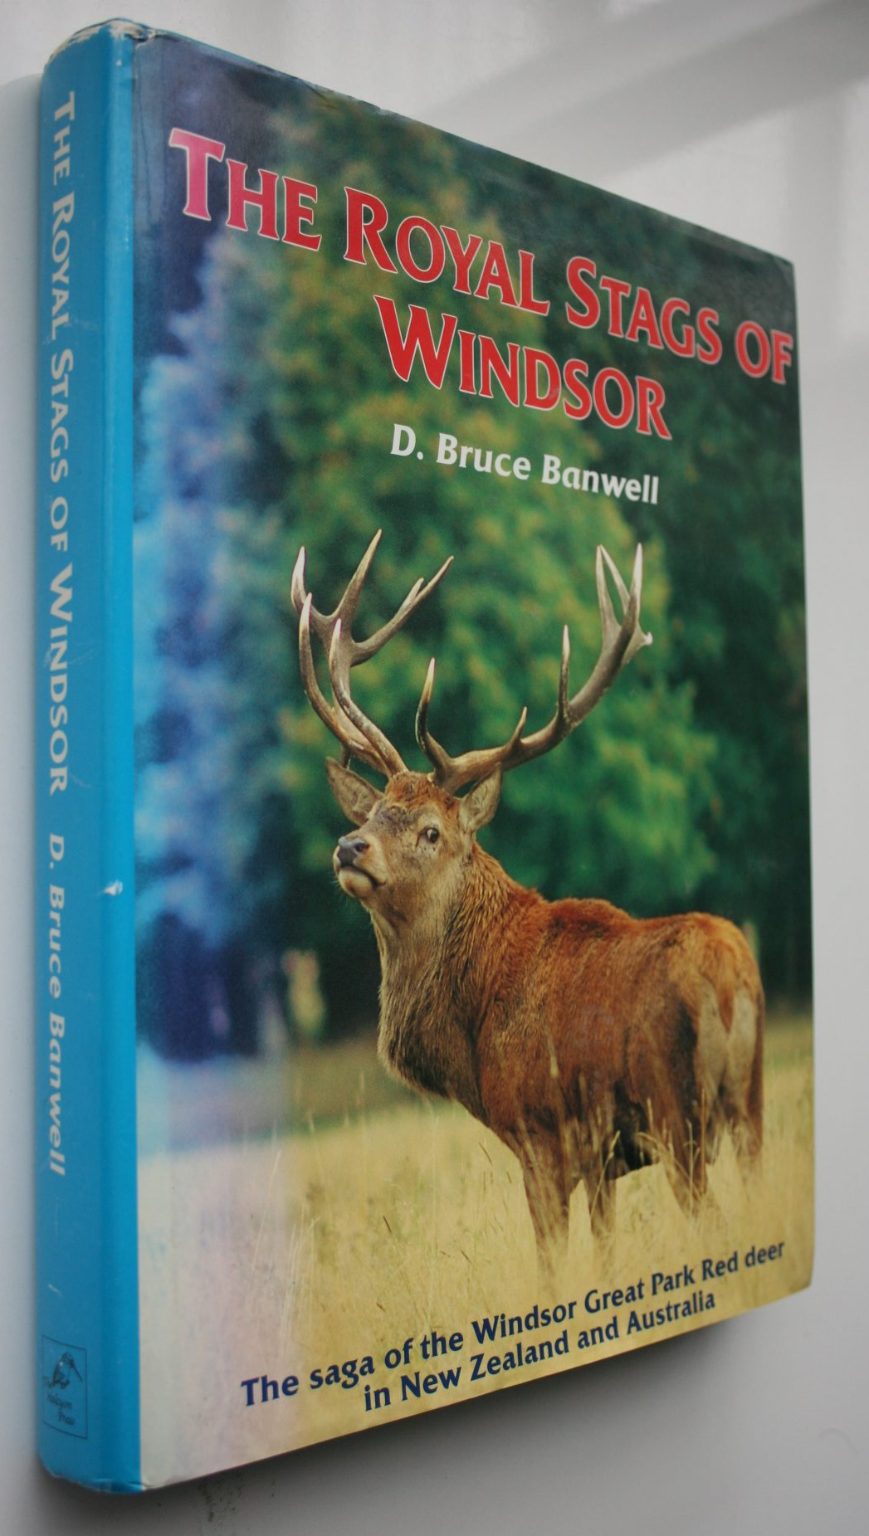 The Royal Stags of Windsor. Saga of the Windsor Great Park Red Deer in New Zealand and Australia by D Bruce Banwell.